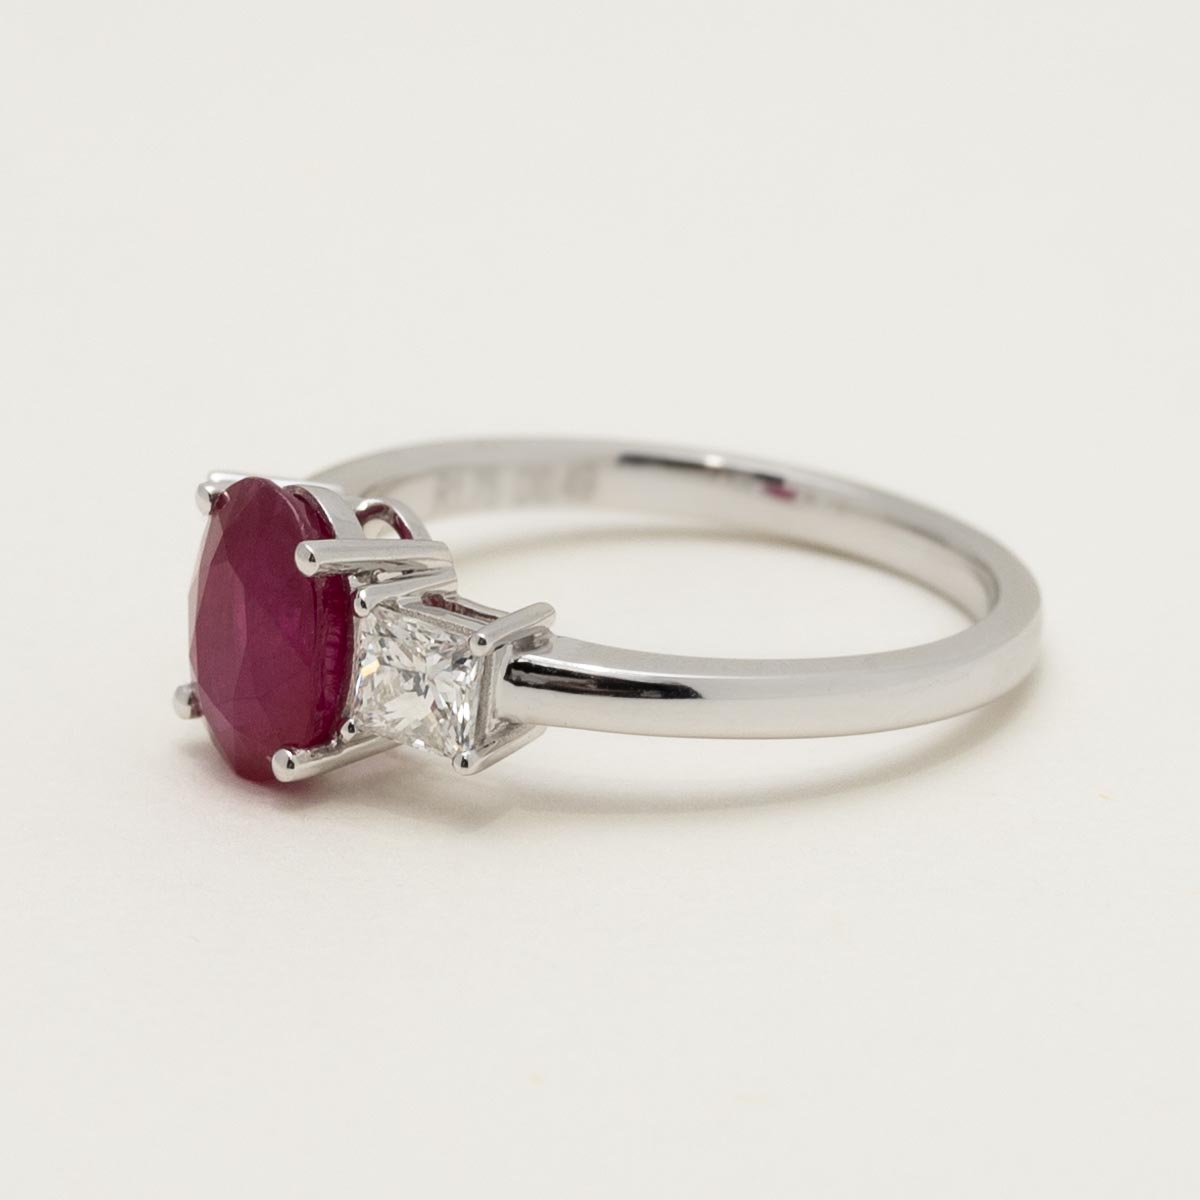 Oval Ruby Ring in 14kt White Gold with Princess Cut Diamonds (1/2ct tw)